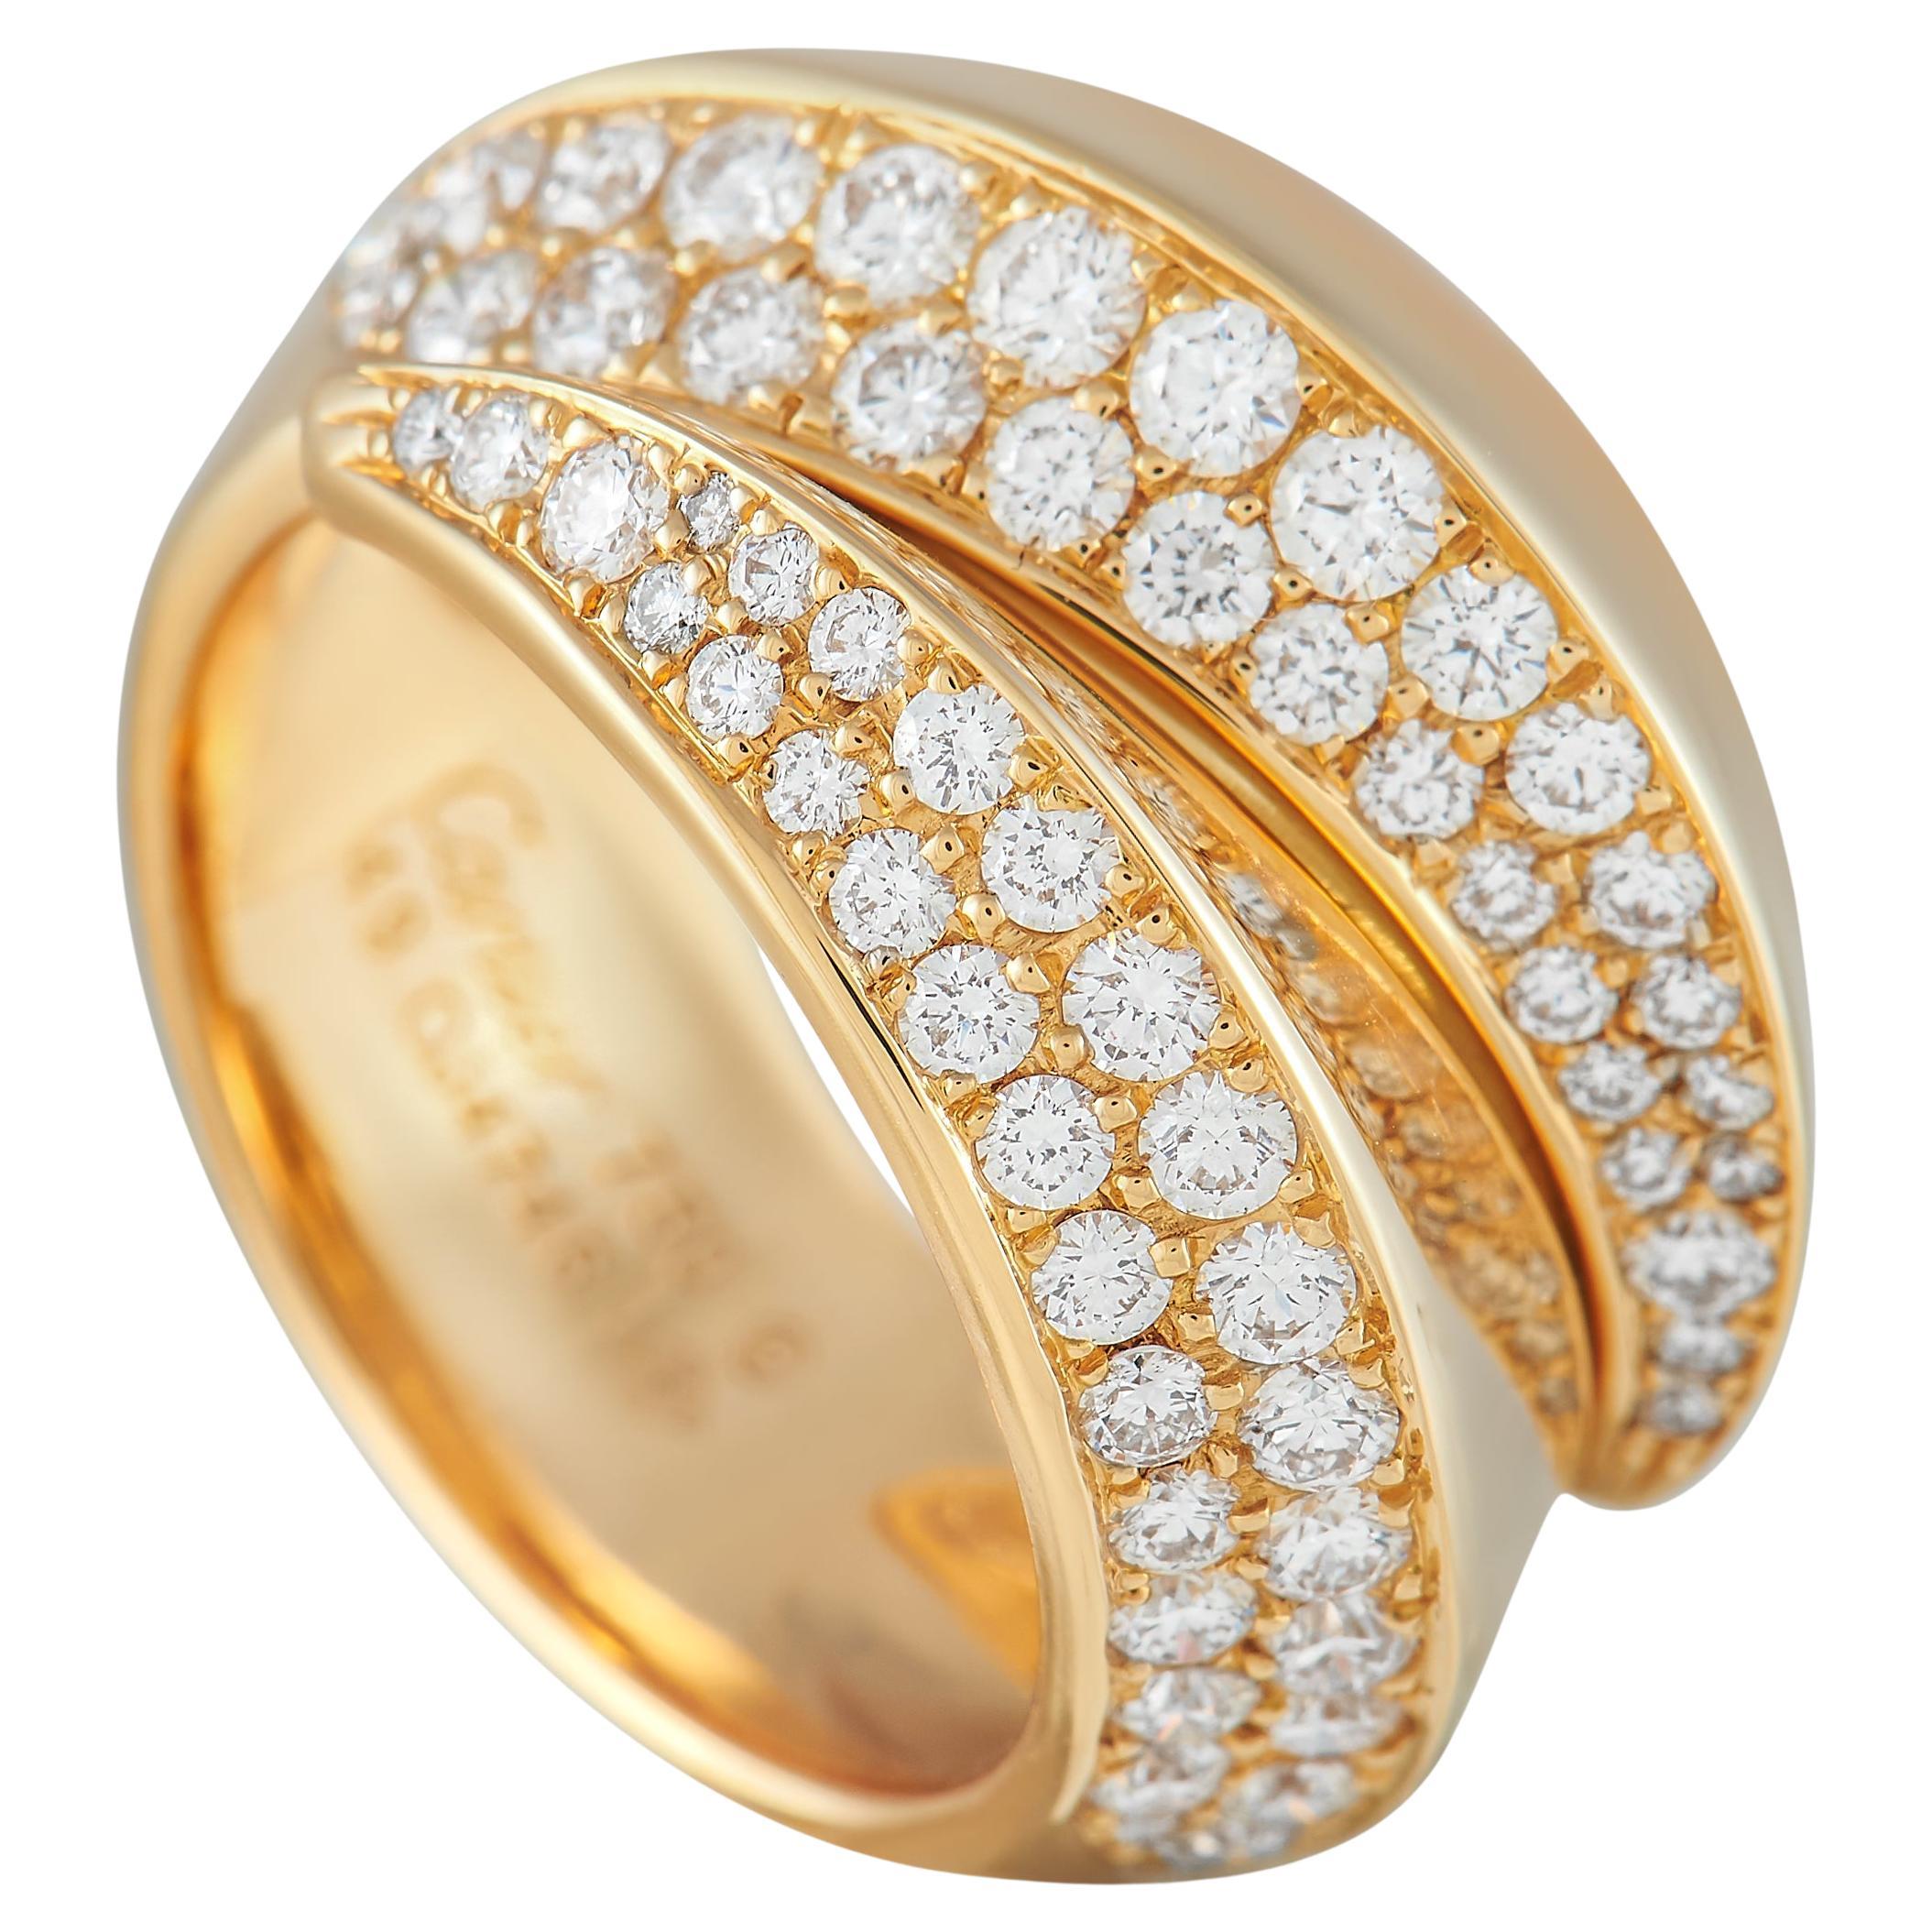 Cartier Griffe 18k Yellow Gold 1.0ct Diamond Ring